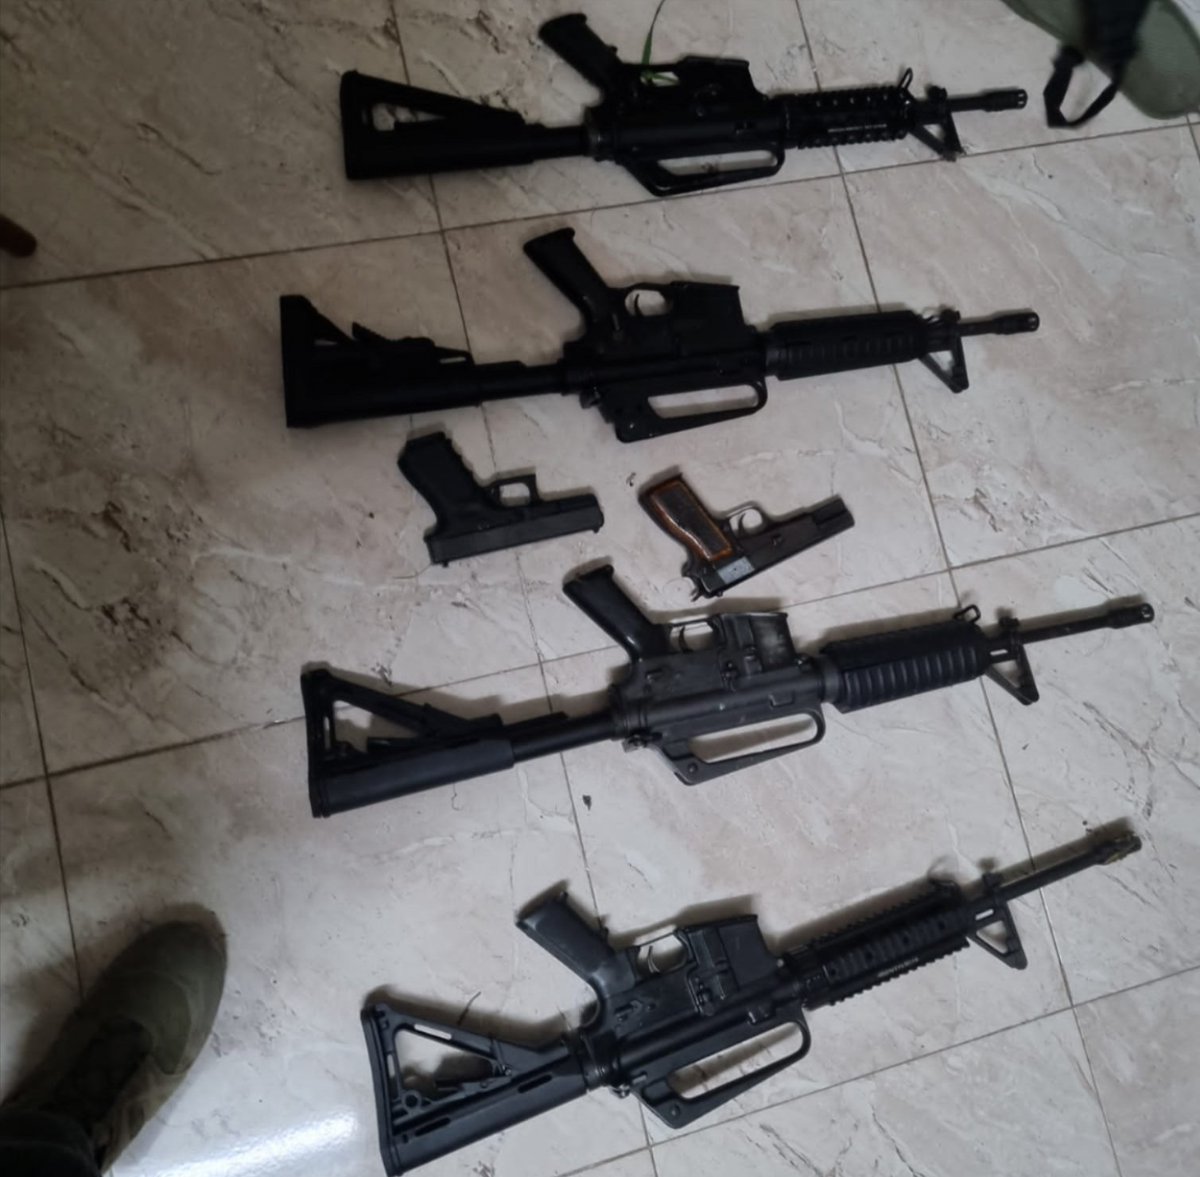 Israeli army says troops detained 11 wanted Palestinians during overnight raids across the West Bank, seized three gunsmith lathes, and 11 firearms